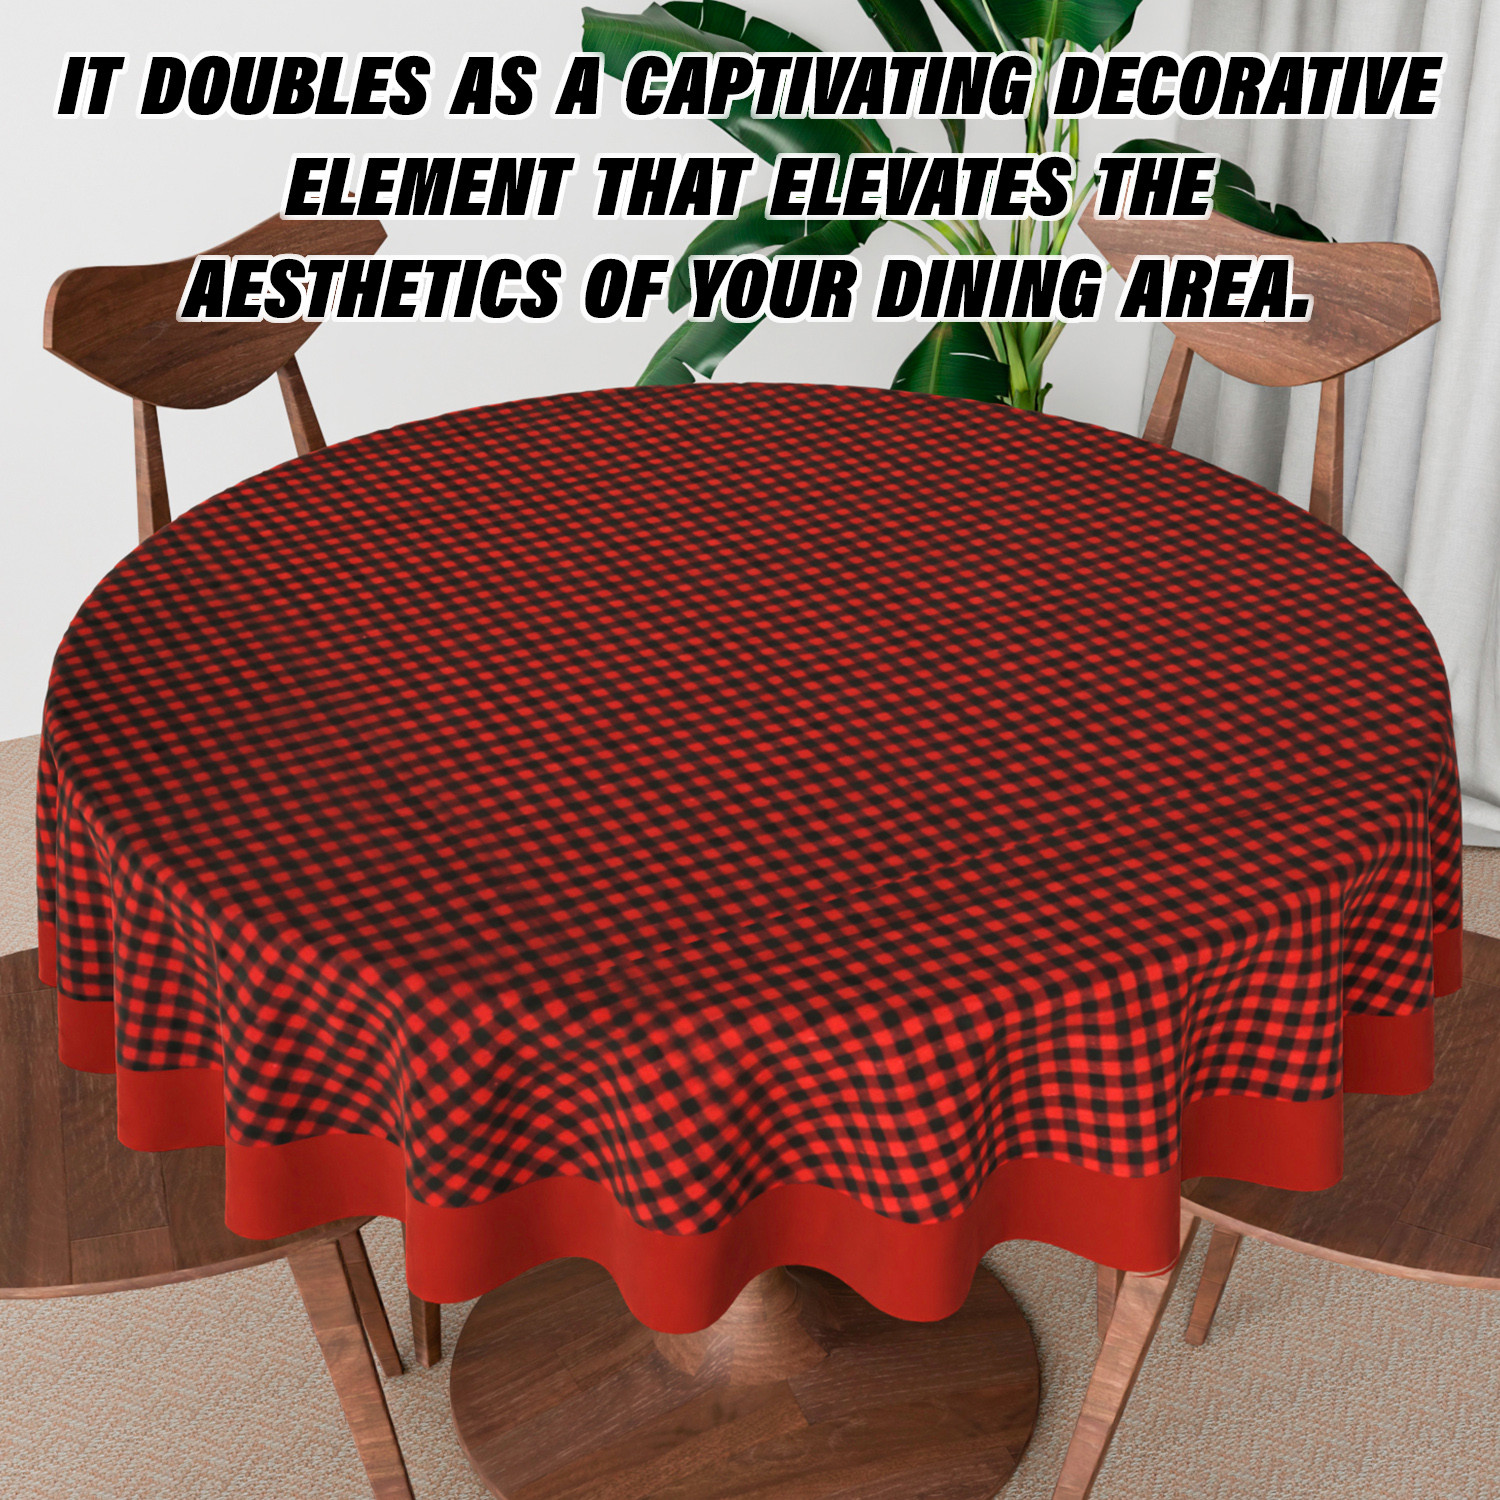 Kuber Industries Round Table Cover | Cotton Table Cloth for Round Tables | 4 Seater Round Table Cloth | Barik Check Kitchen Dining Tablecloth | Tabletop Cover | 60 Inch | Maroon